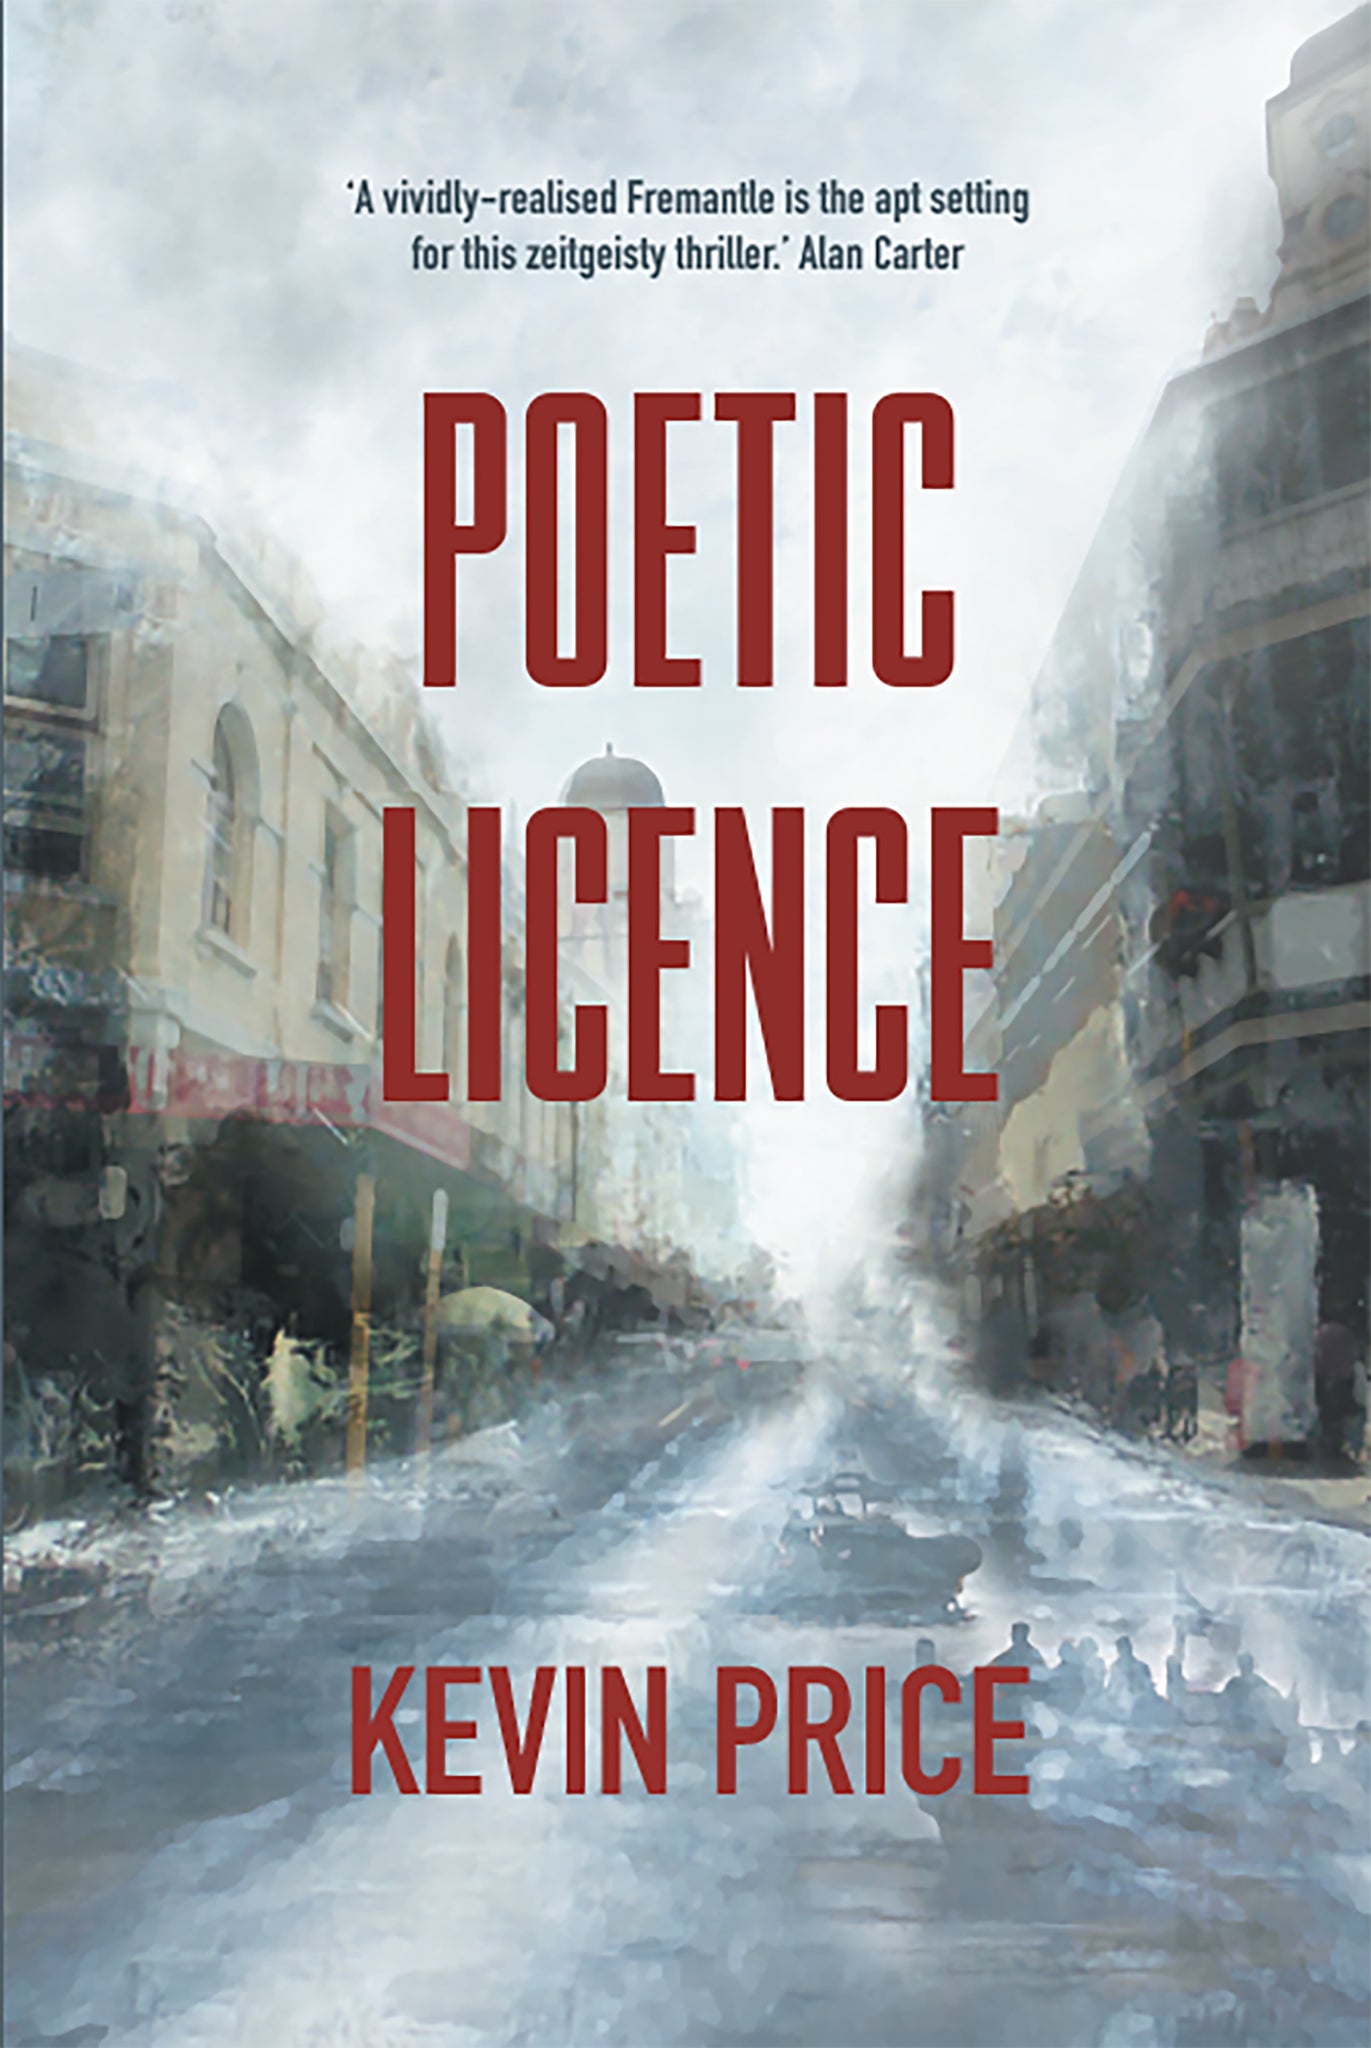 Poetic Licence by Kevin Price